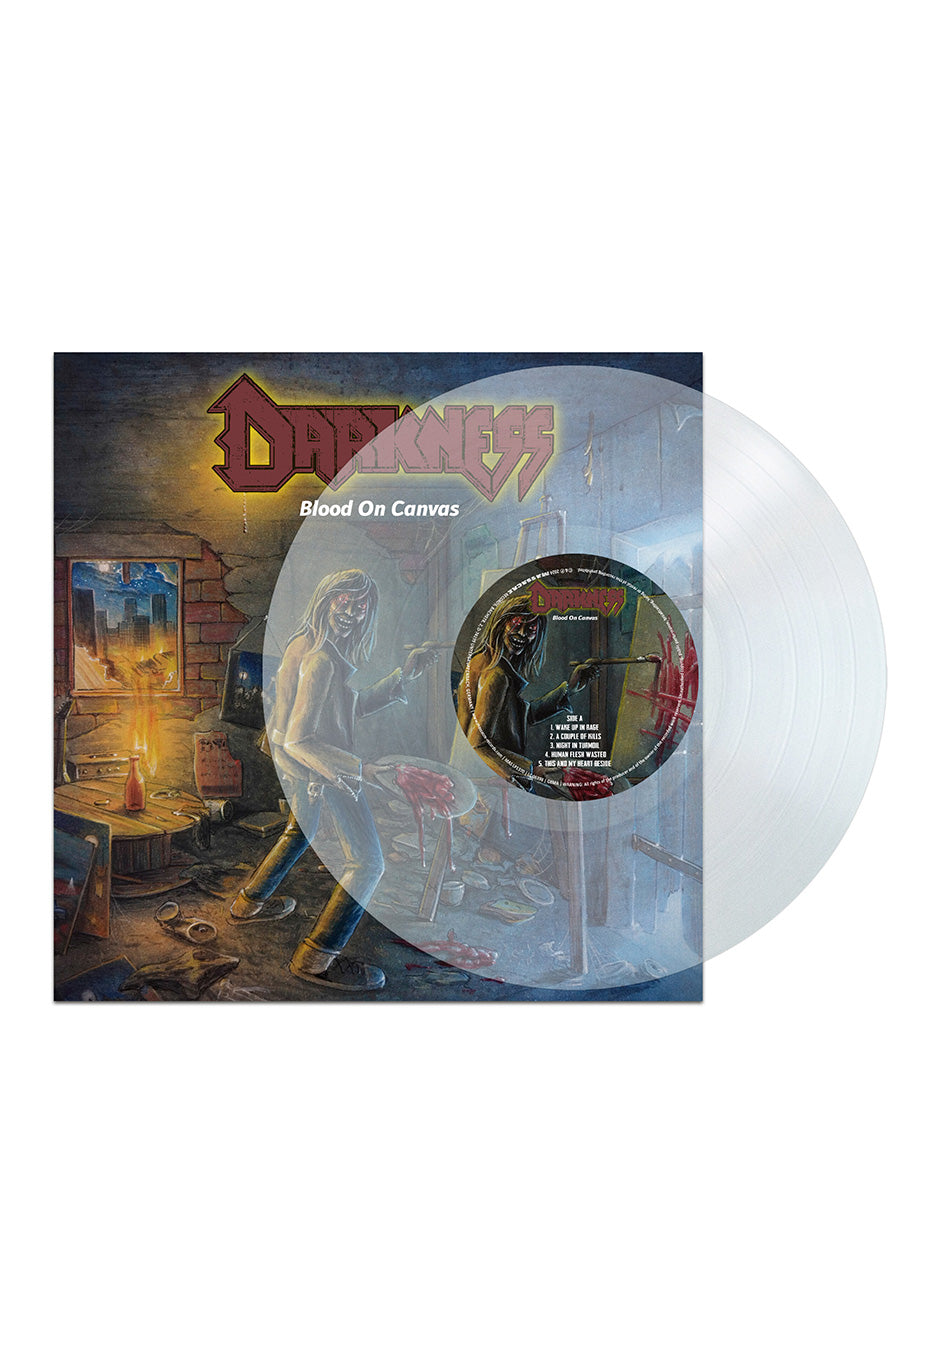 Darkness - Blood On Canvas Ltd. Clear - Colored Vinyl